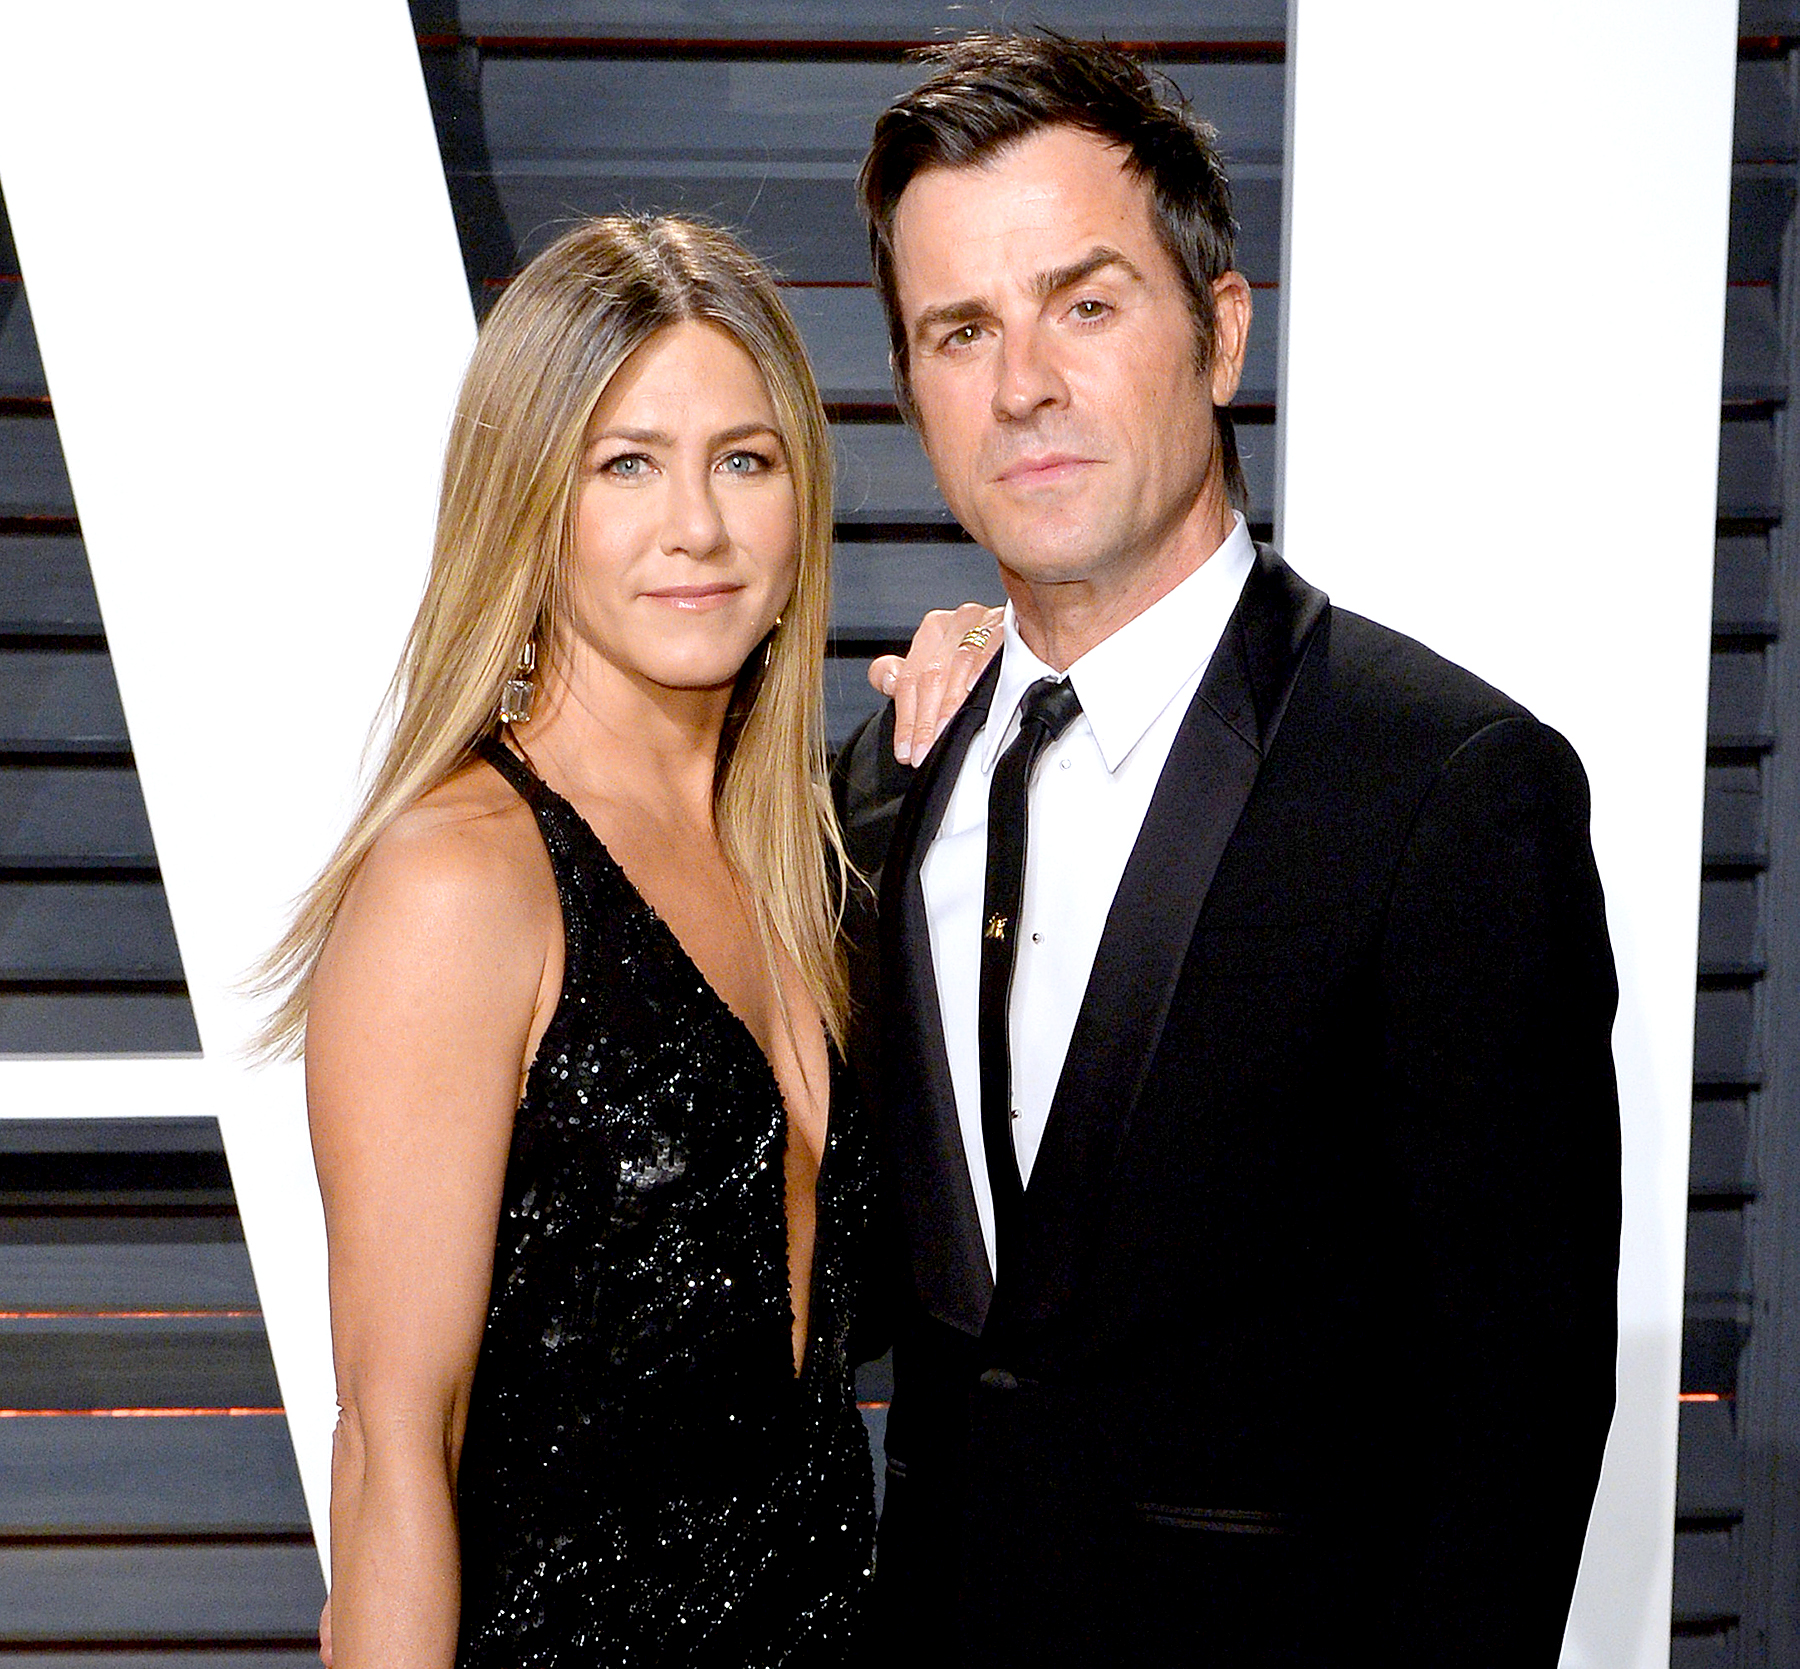 Justin Theroux and Jennifer Aniston attending the Louis Vuitton's